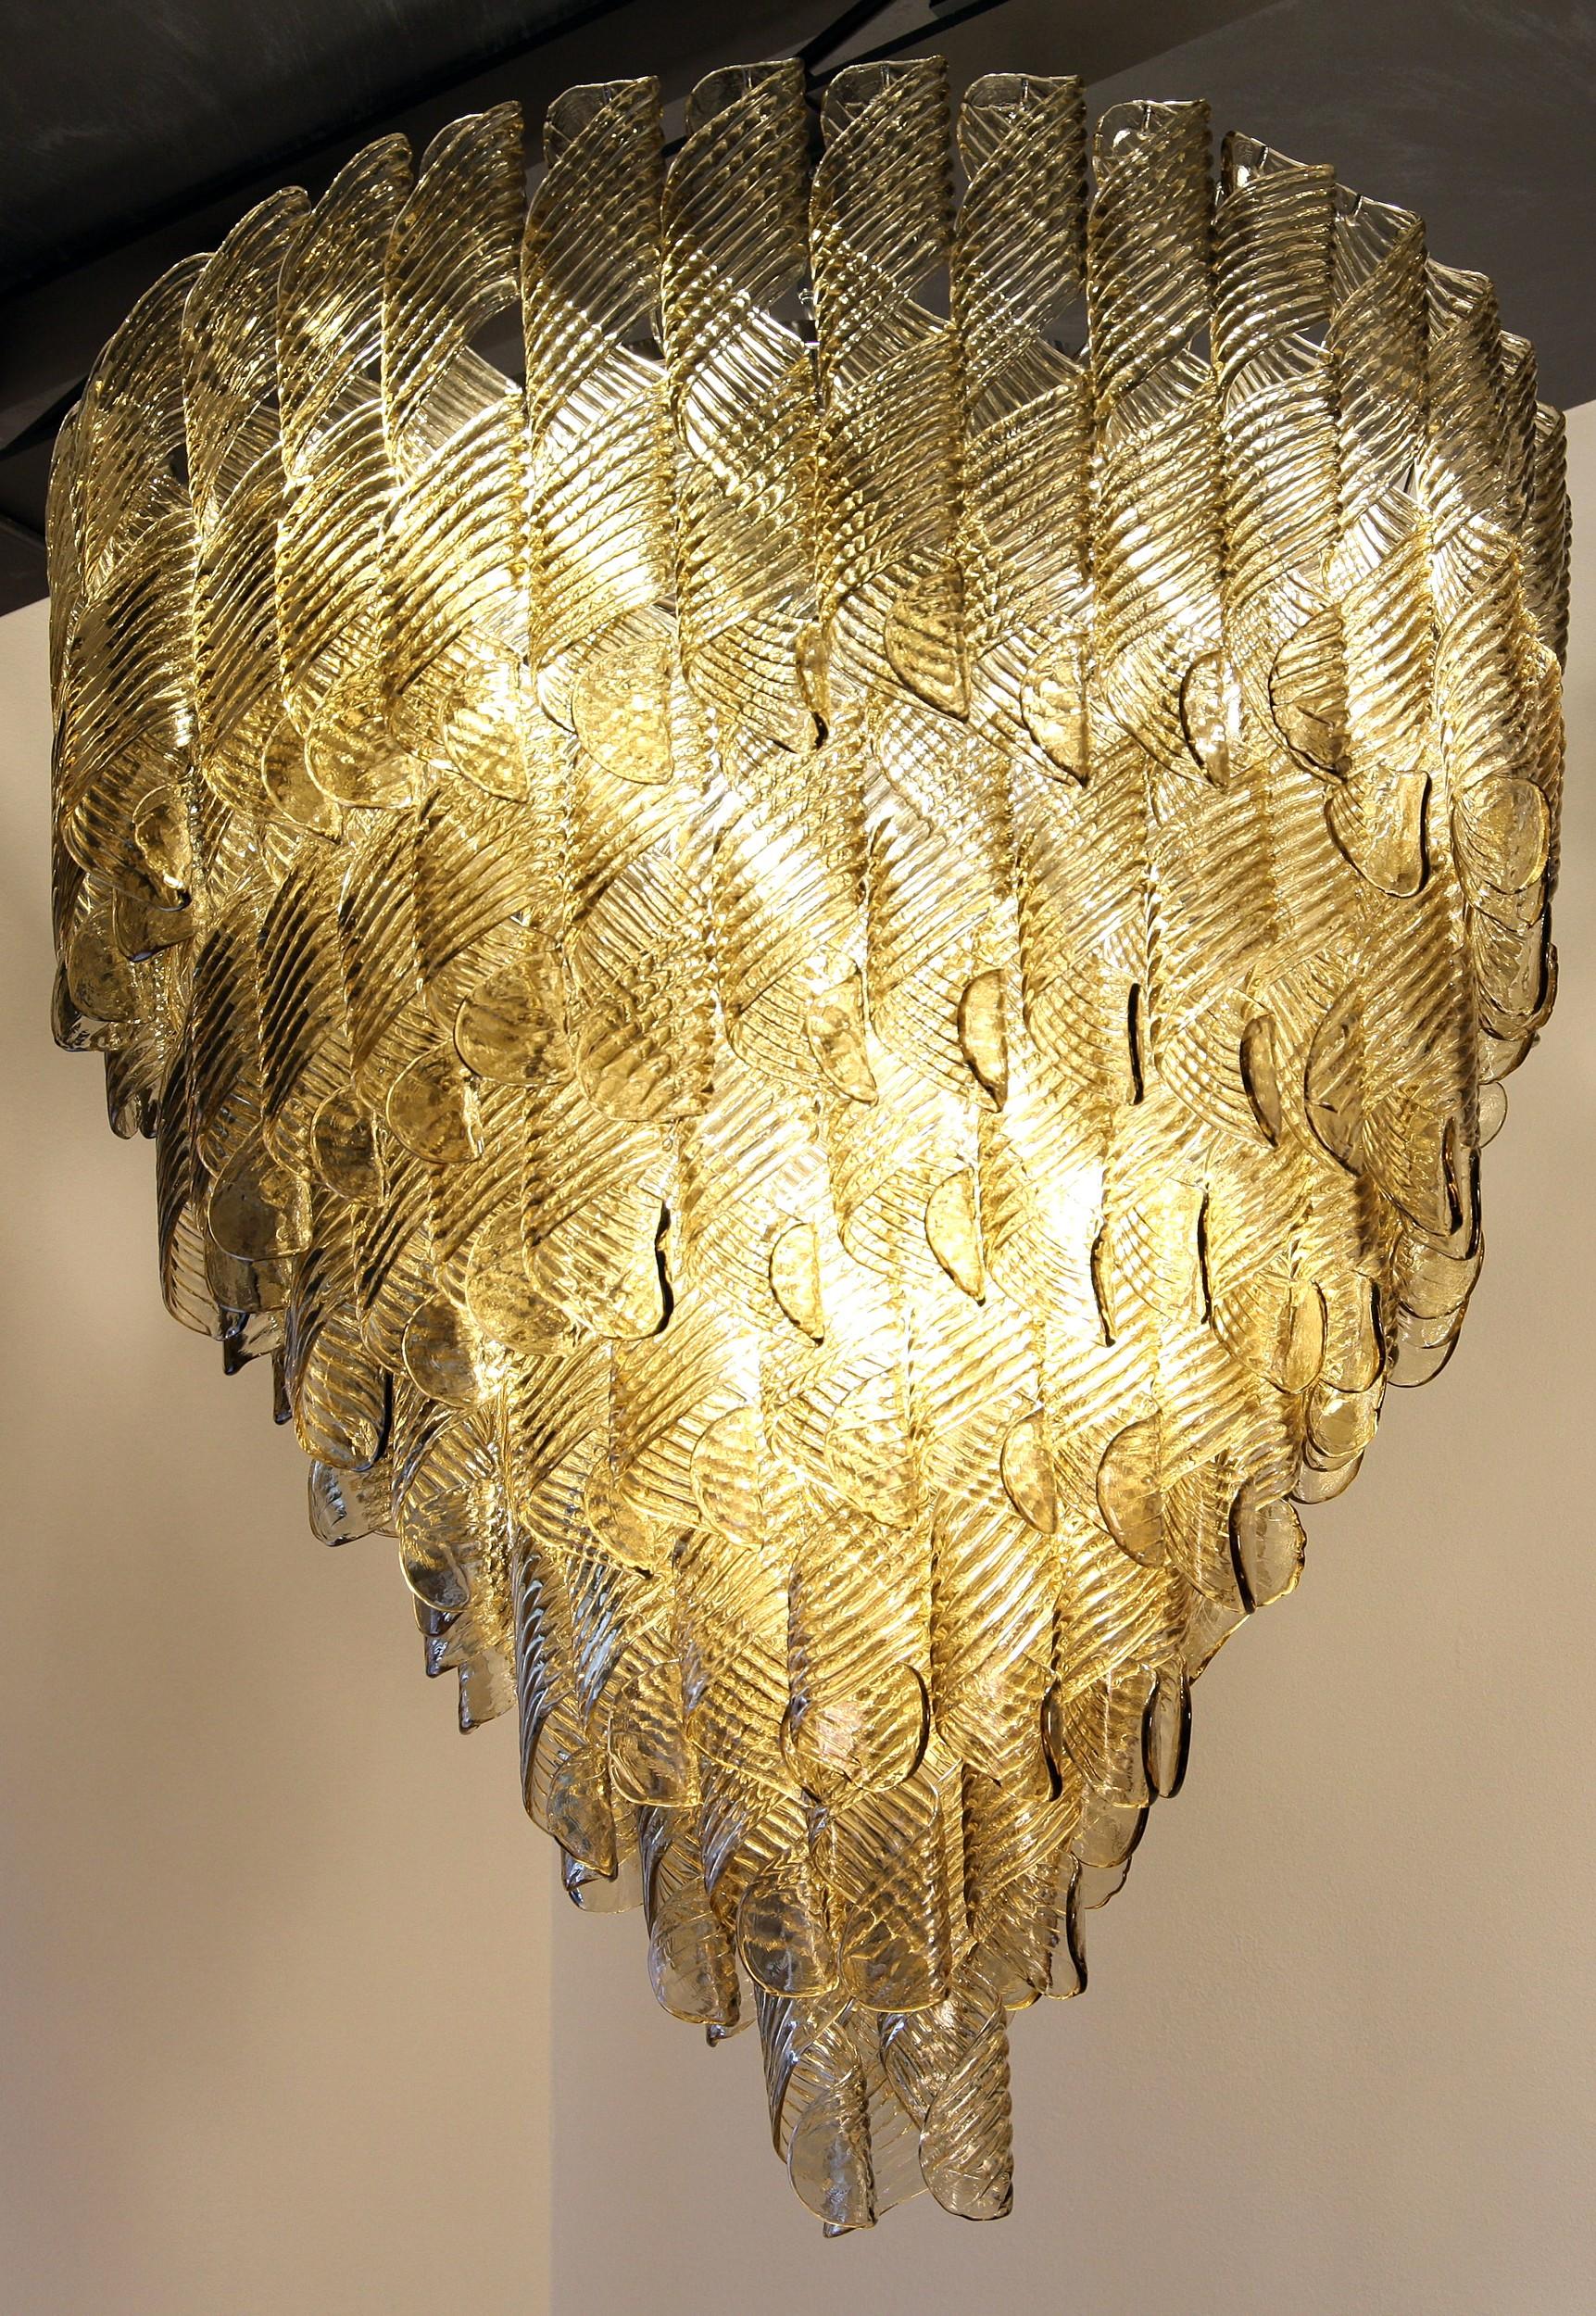 Iron Large Chandelier, Murano Light Fume Glass in Oval Spiral Ribbed Elements 7 Tiers